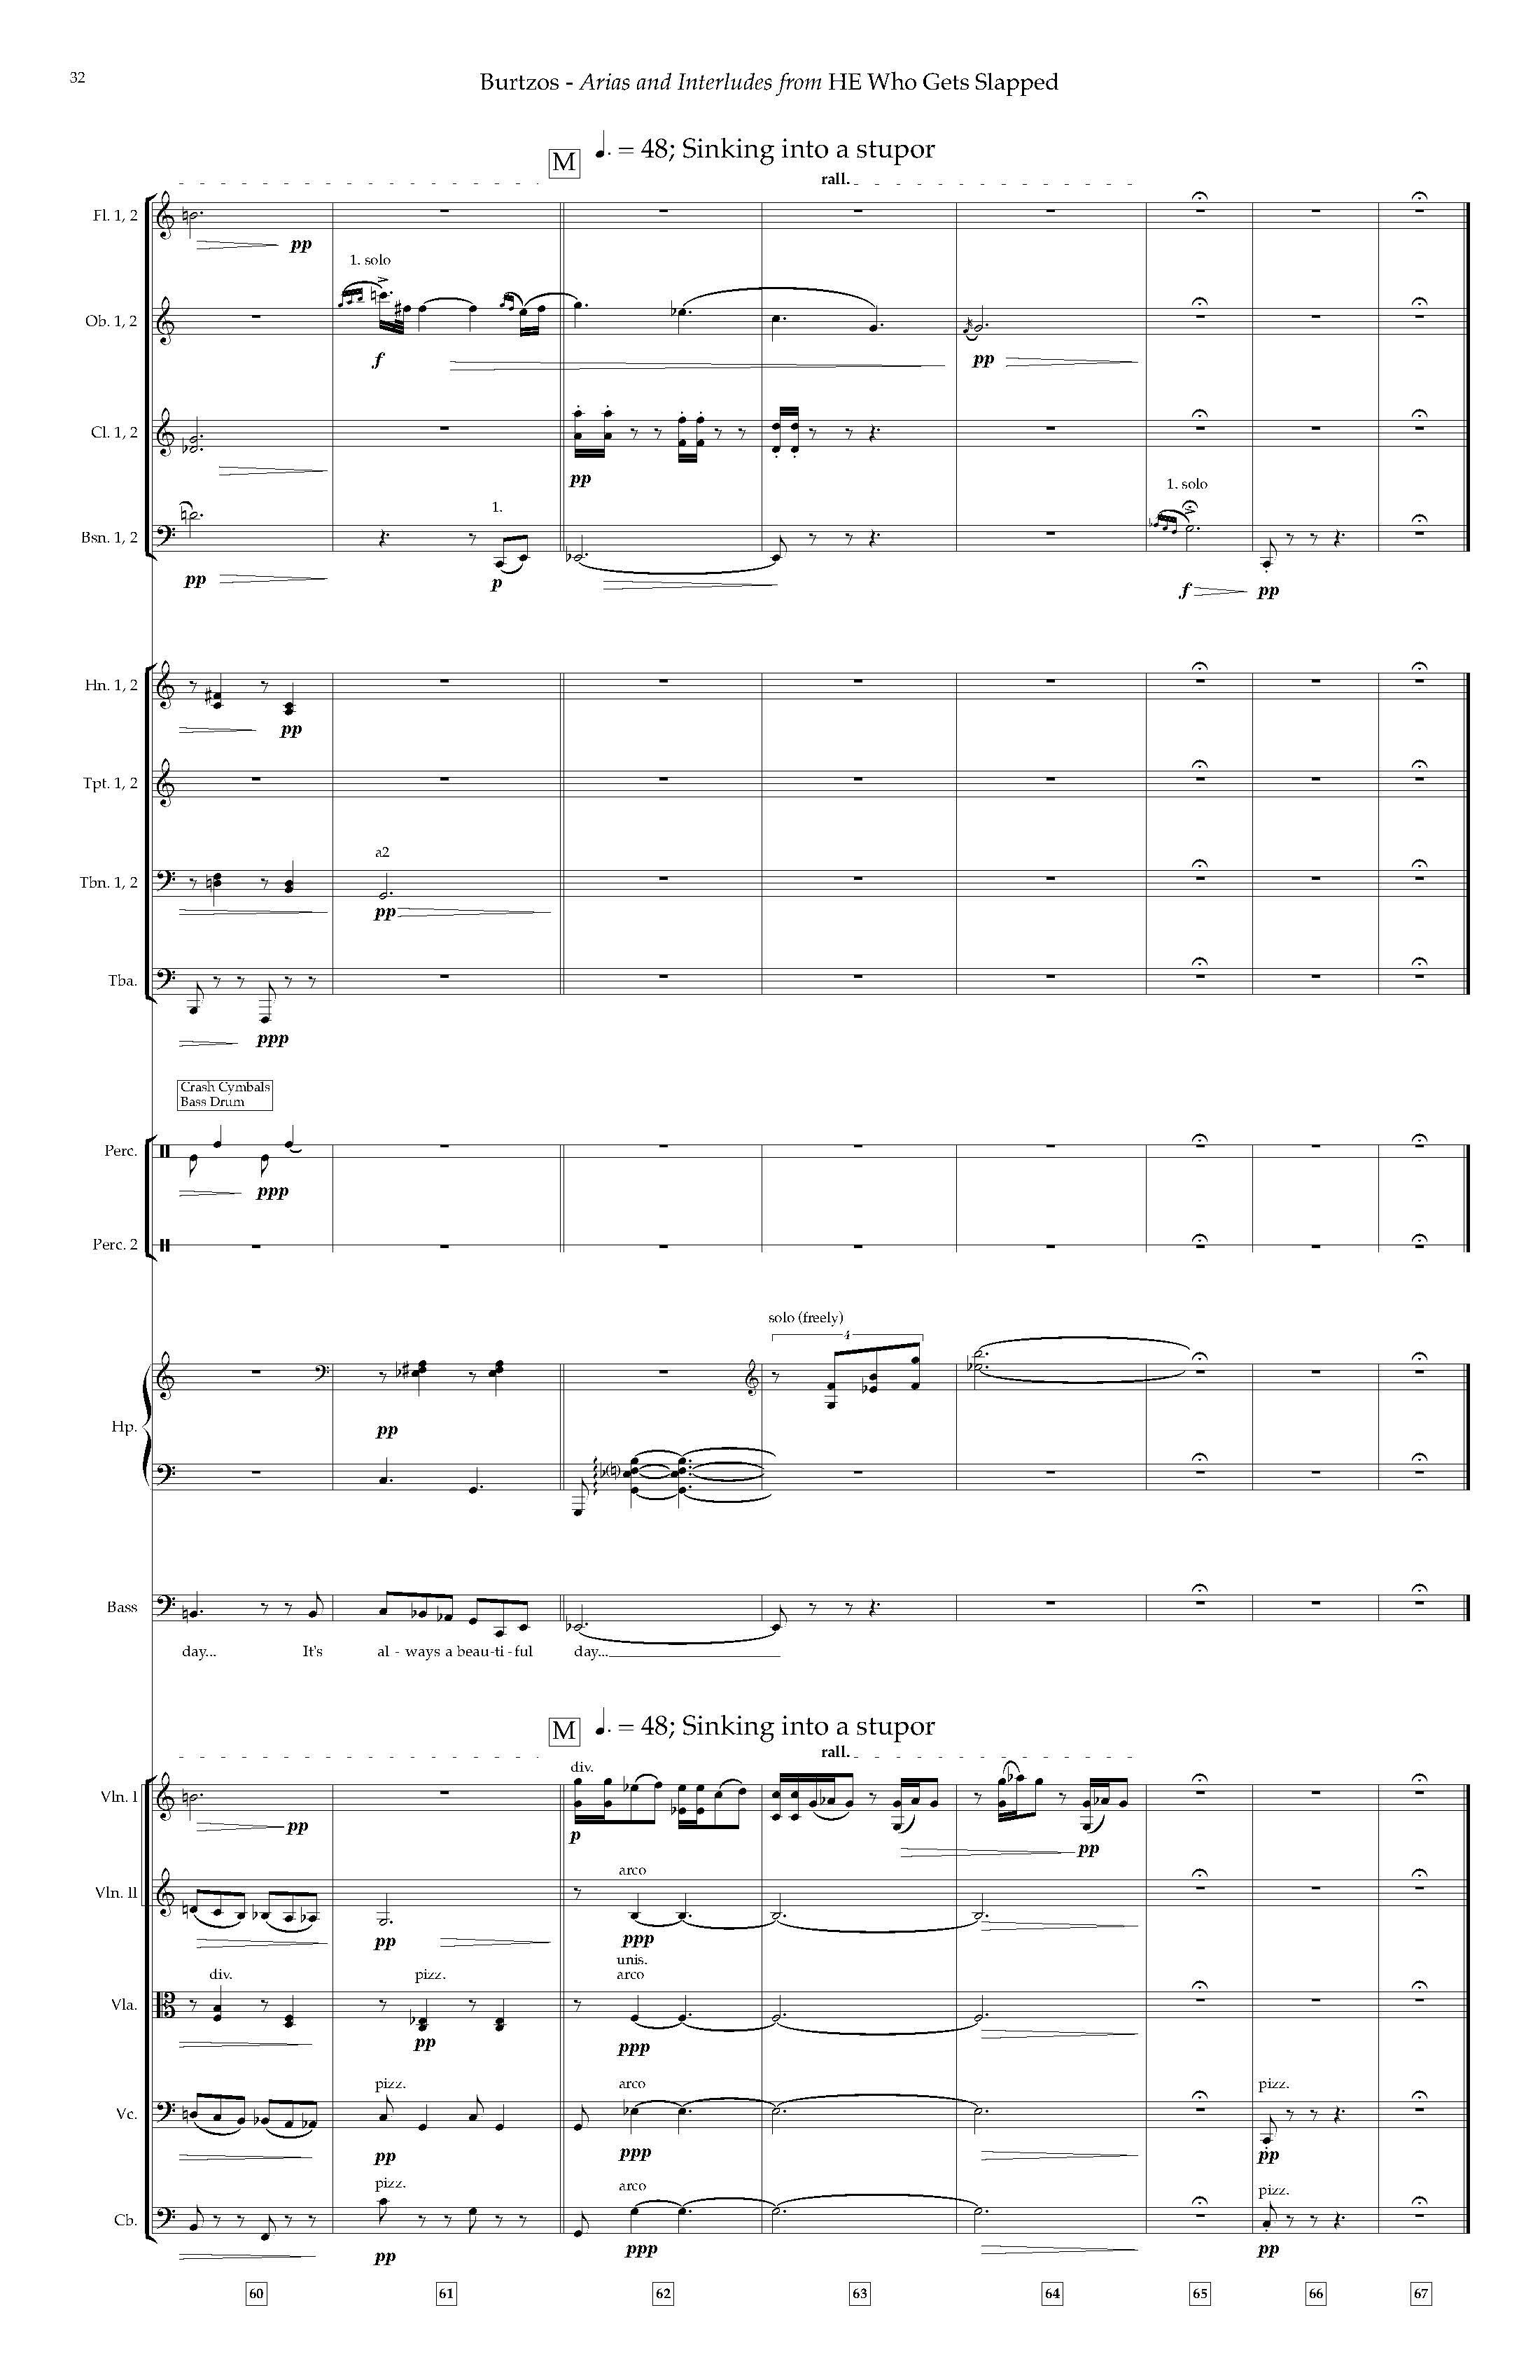 Arias and Interludes from HWGS - Complete Score_Page_38.jpg